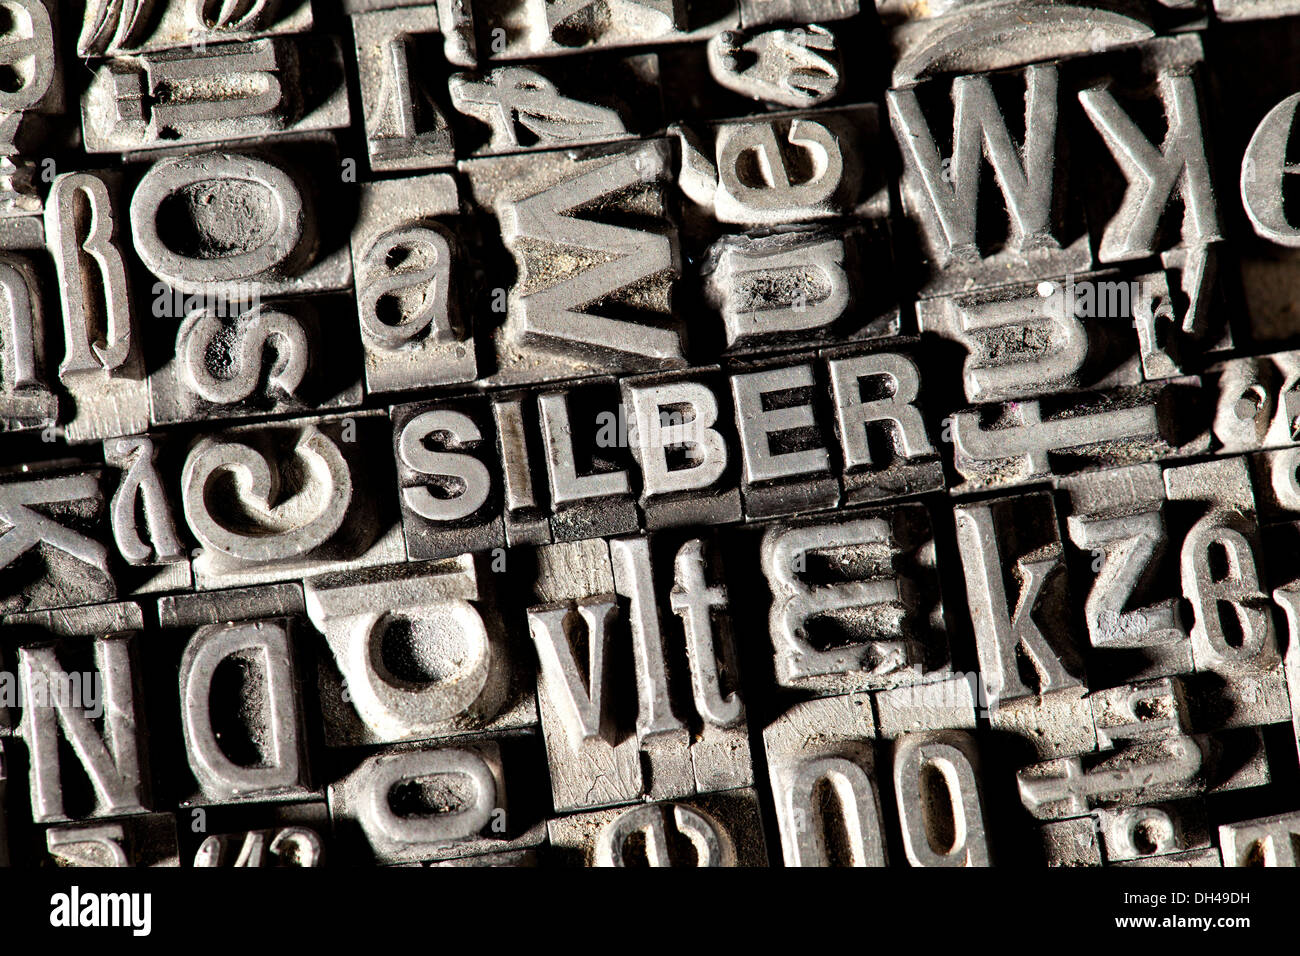 Old lead letters forming the word SILBER, German for silver Stock Photo